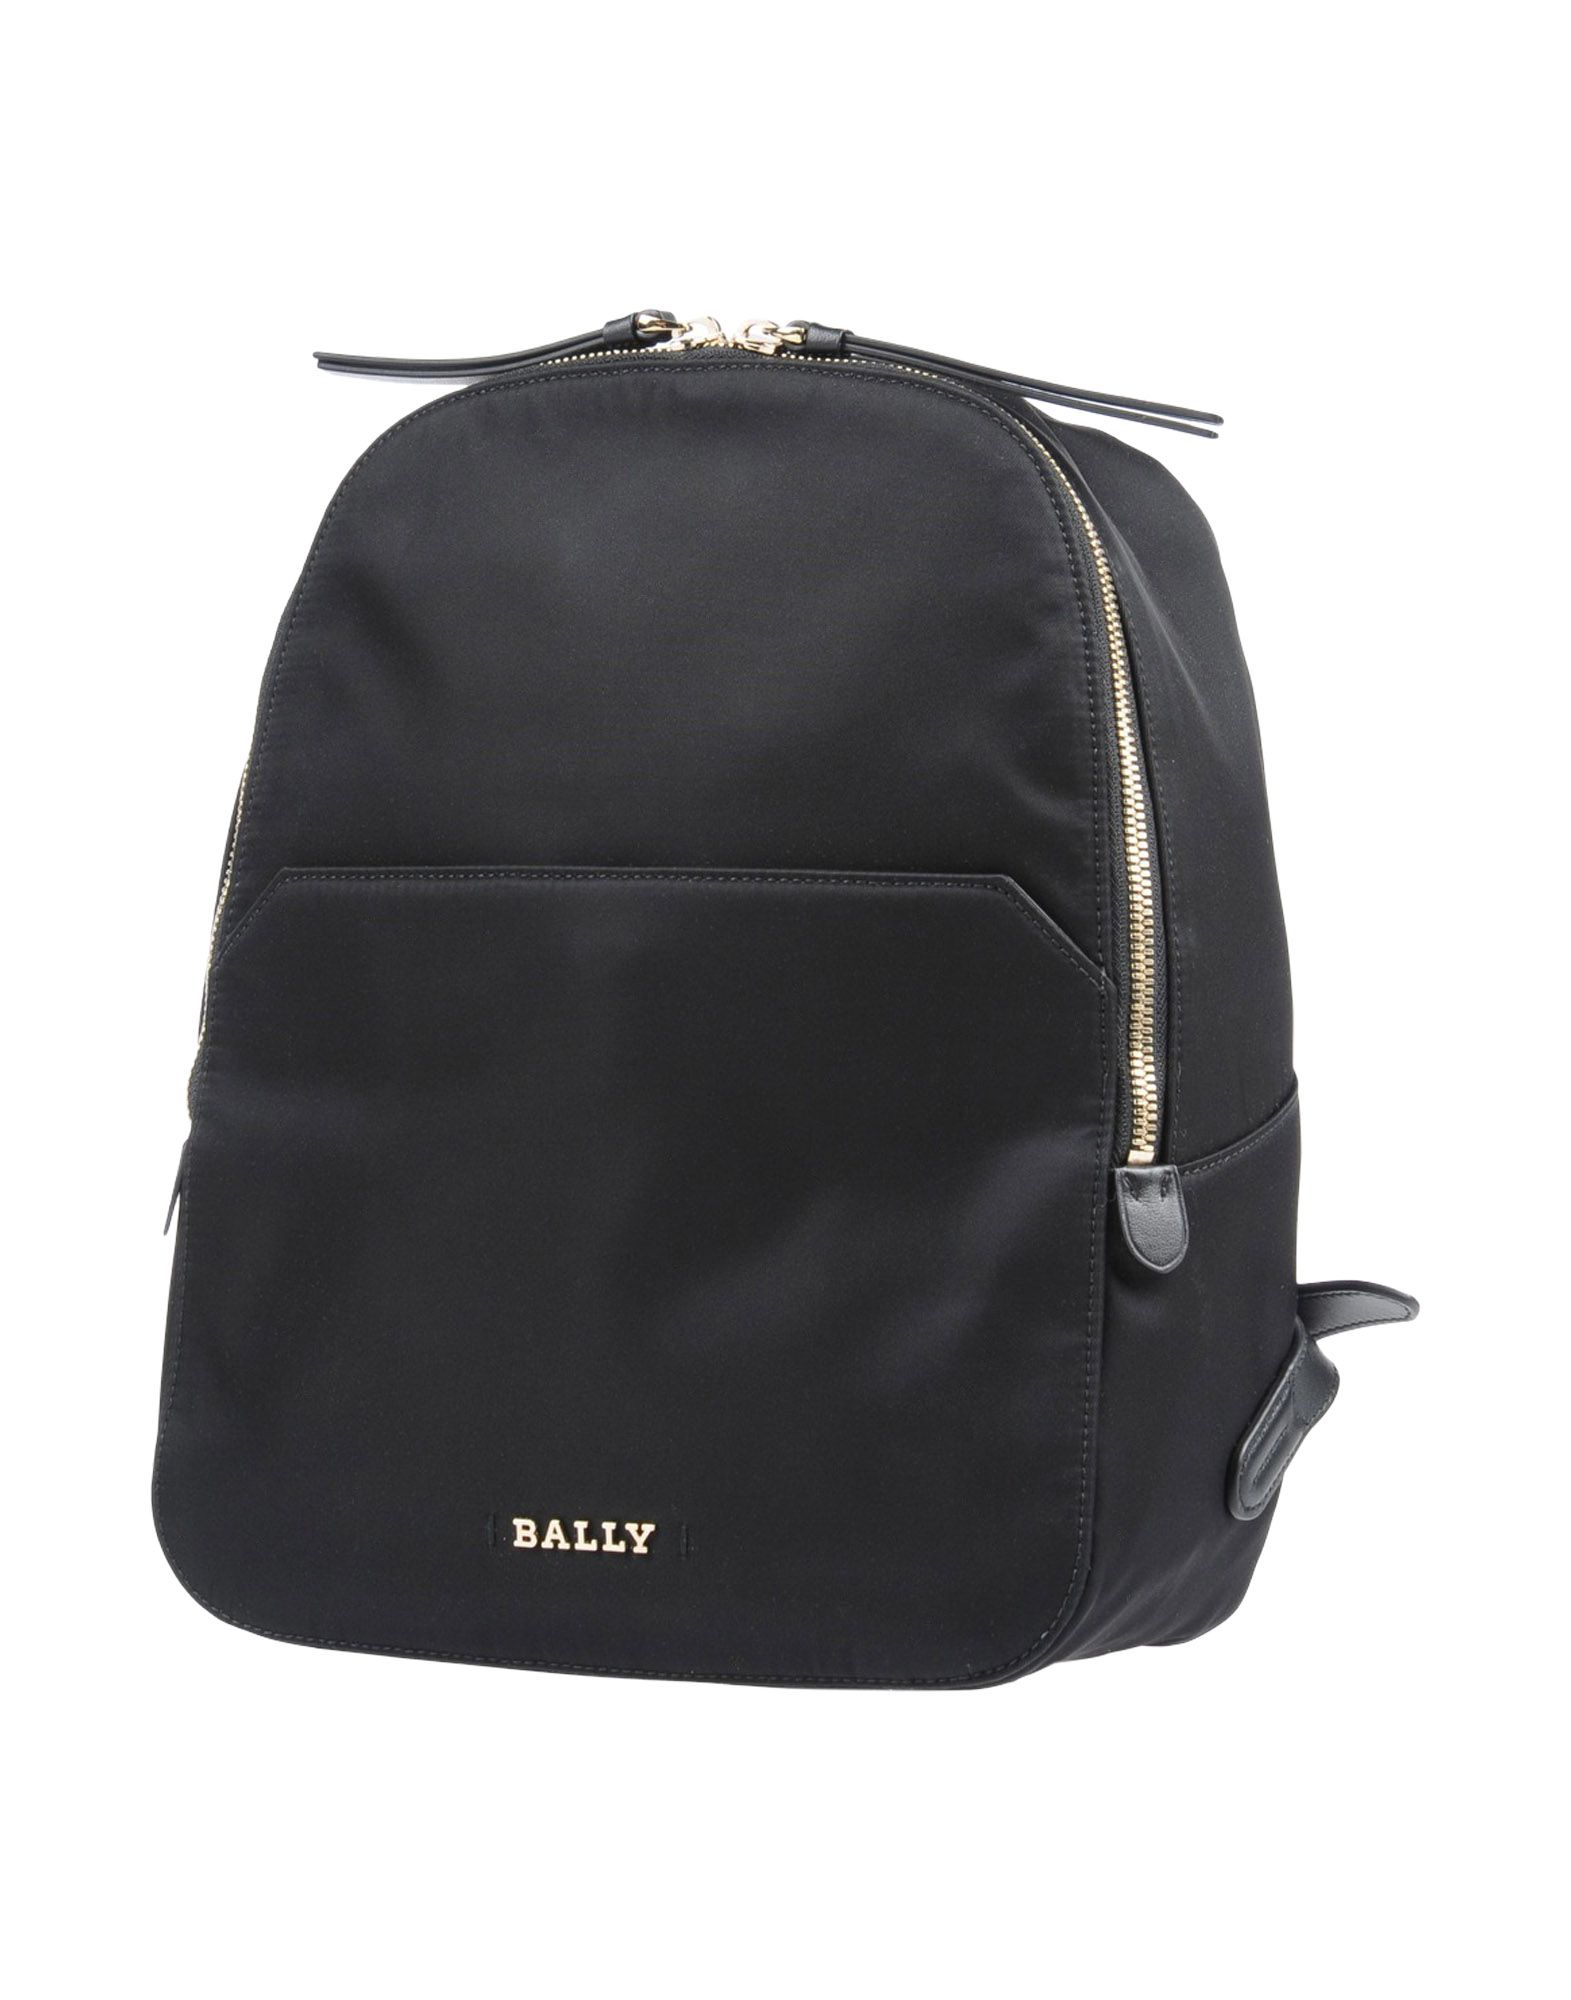 BALLY Backpack & fanny pack,45403834LO 1